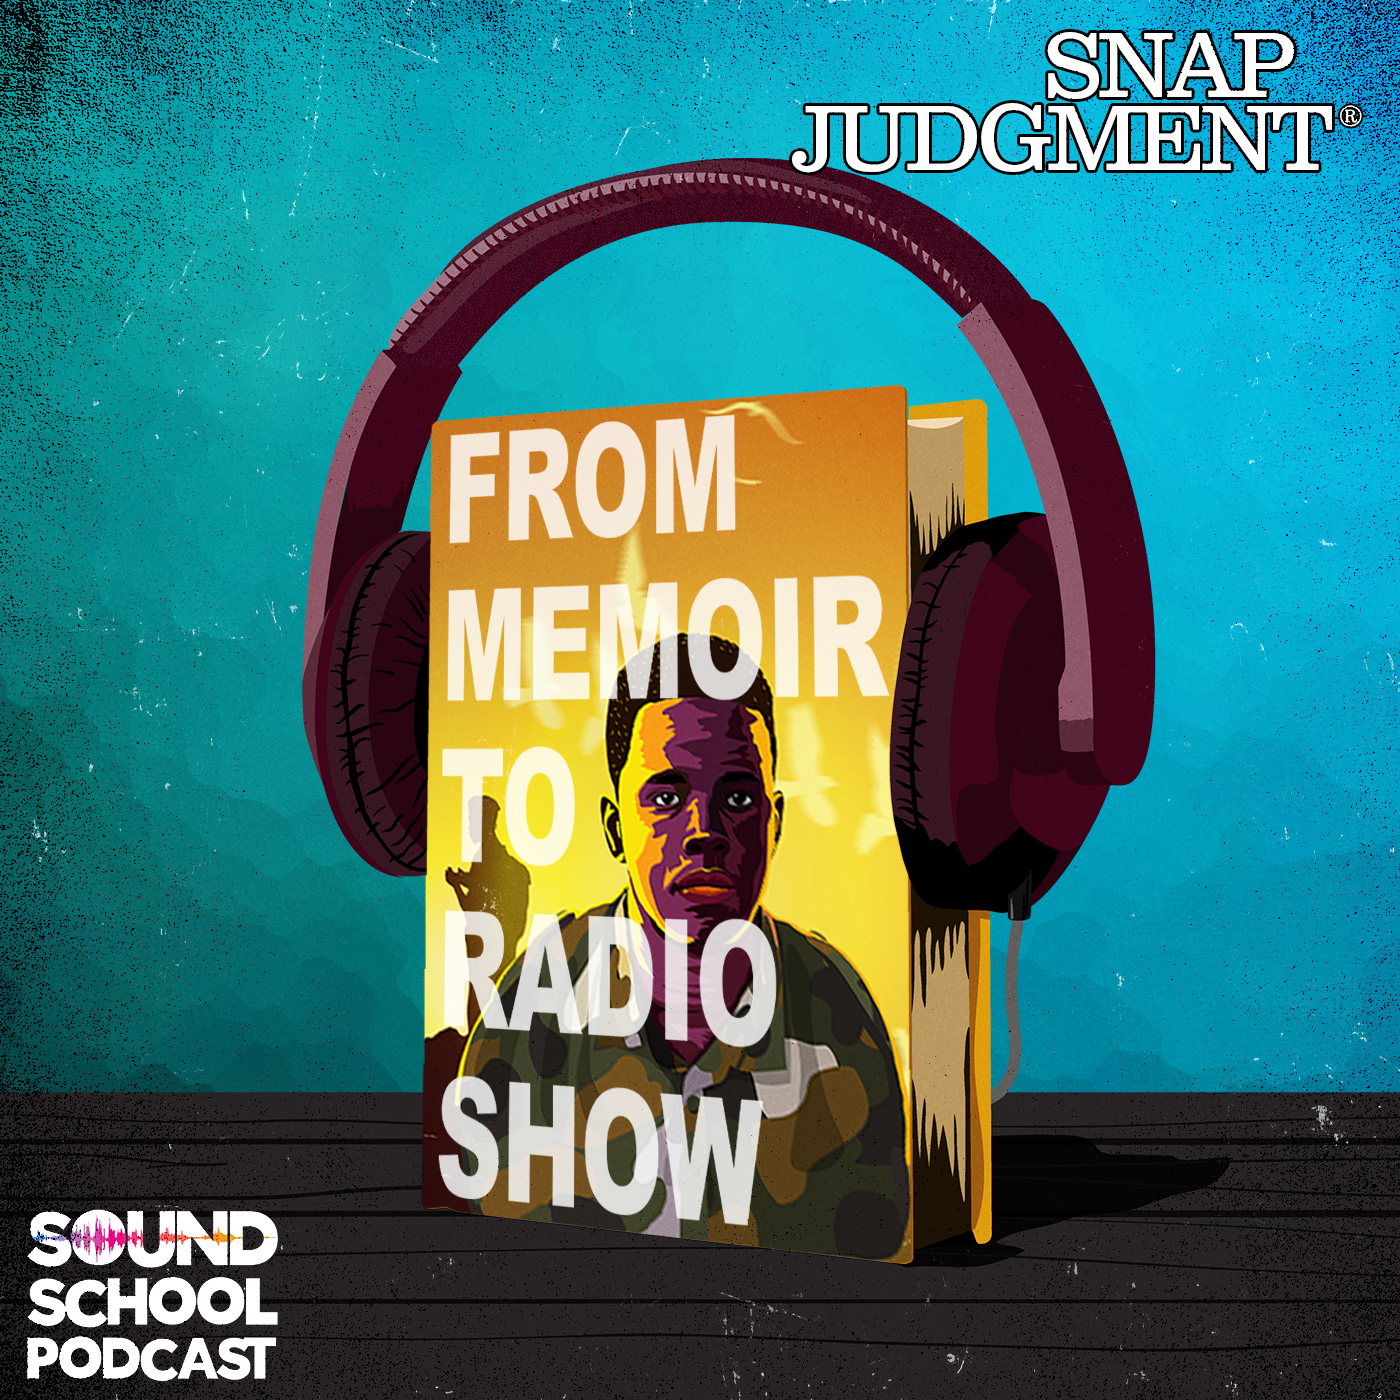 Thumbnail for "How I Made a Snap Story from Sound School Podcast".